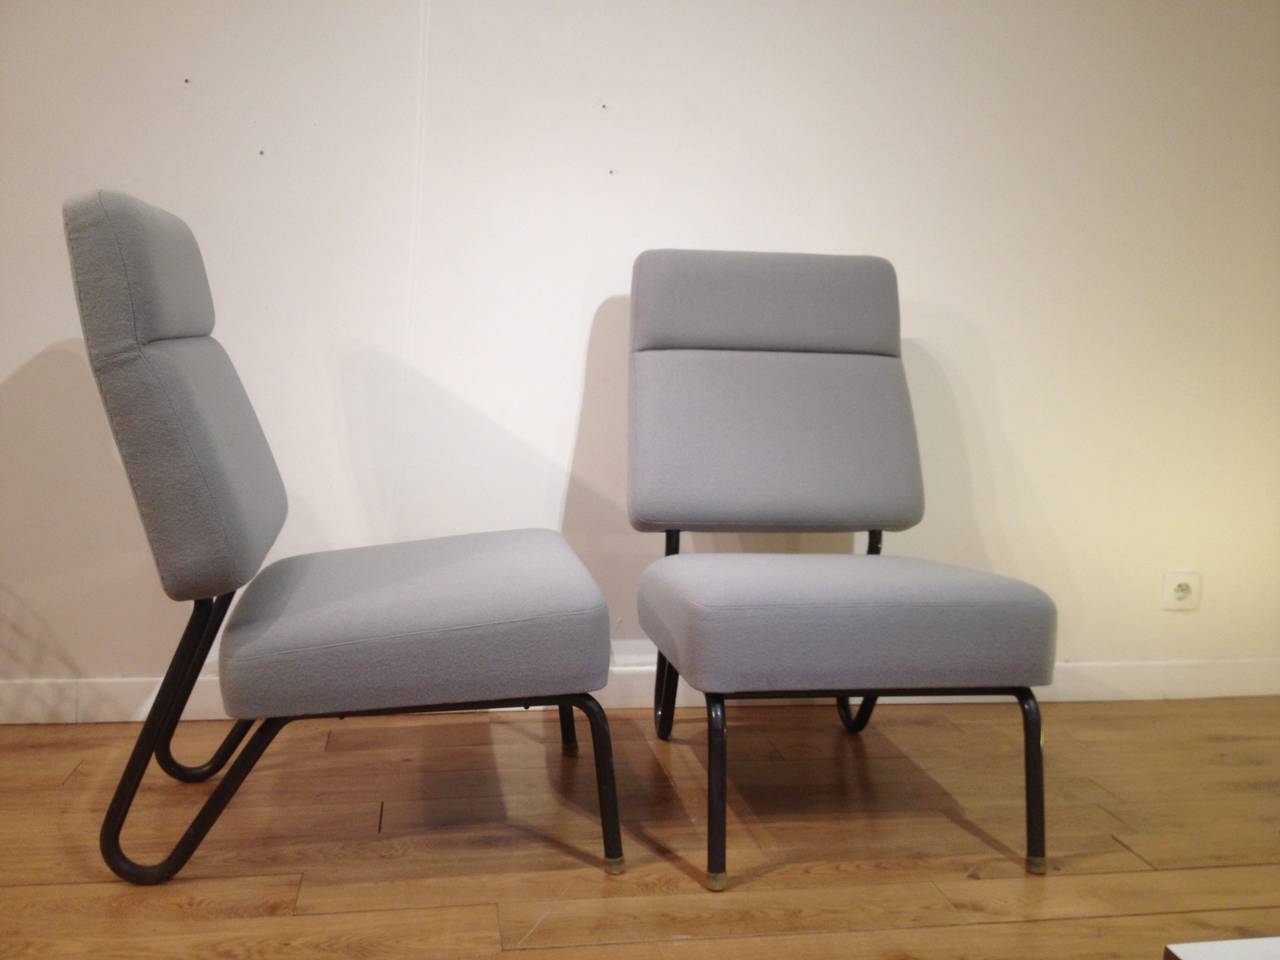 Rare pair of low chairs 